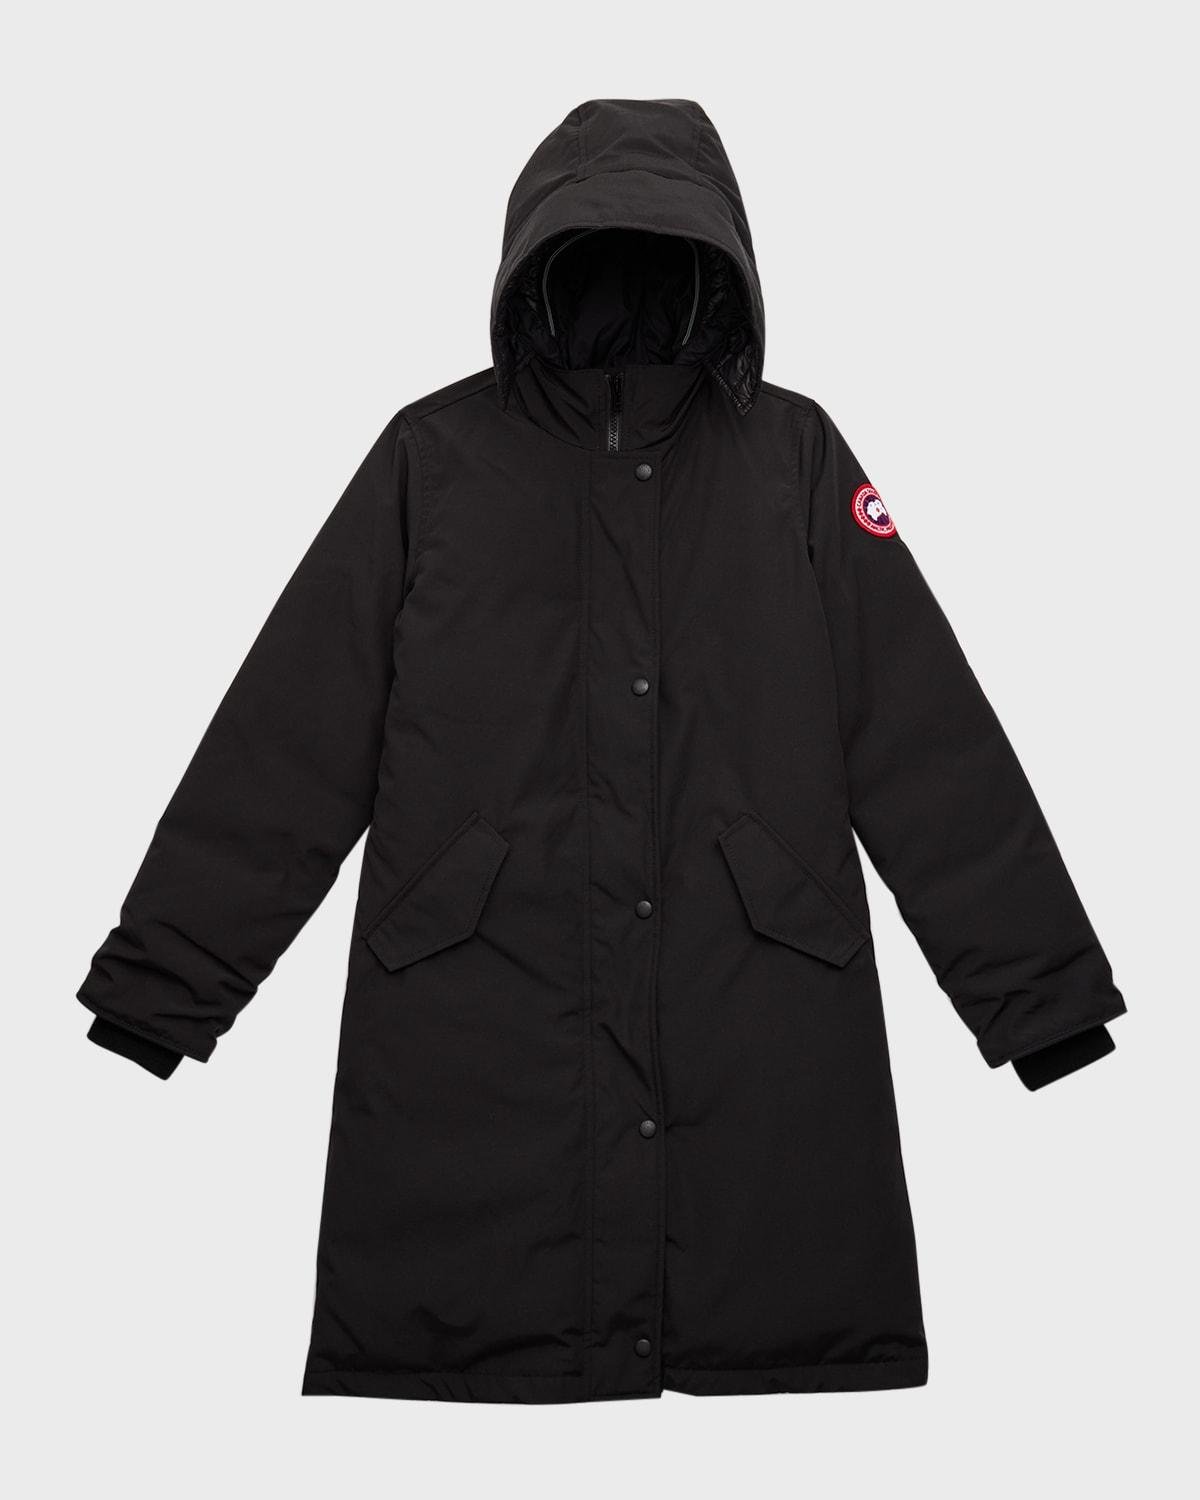 Kid's Brittania Button Front Parka, Size S-L by CANADA GOOSE